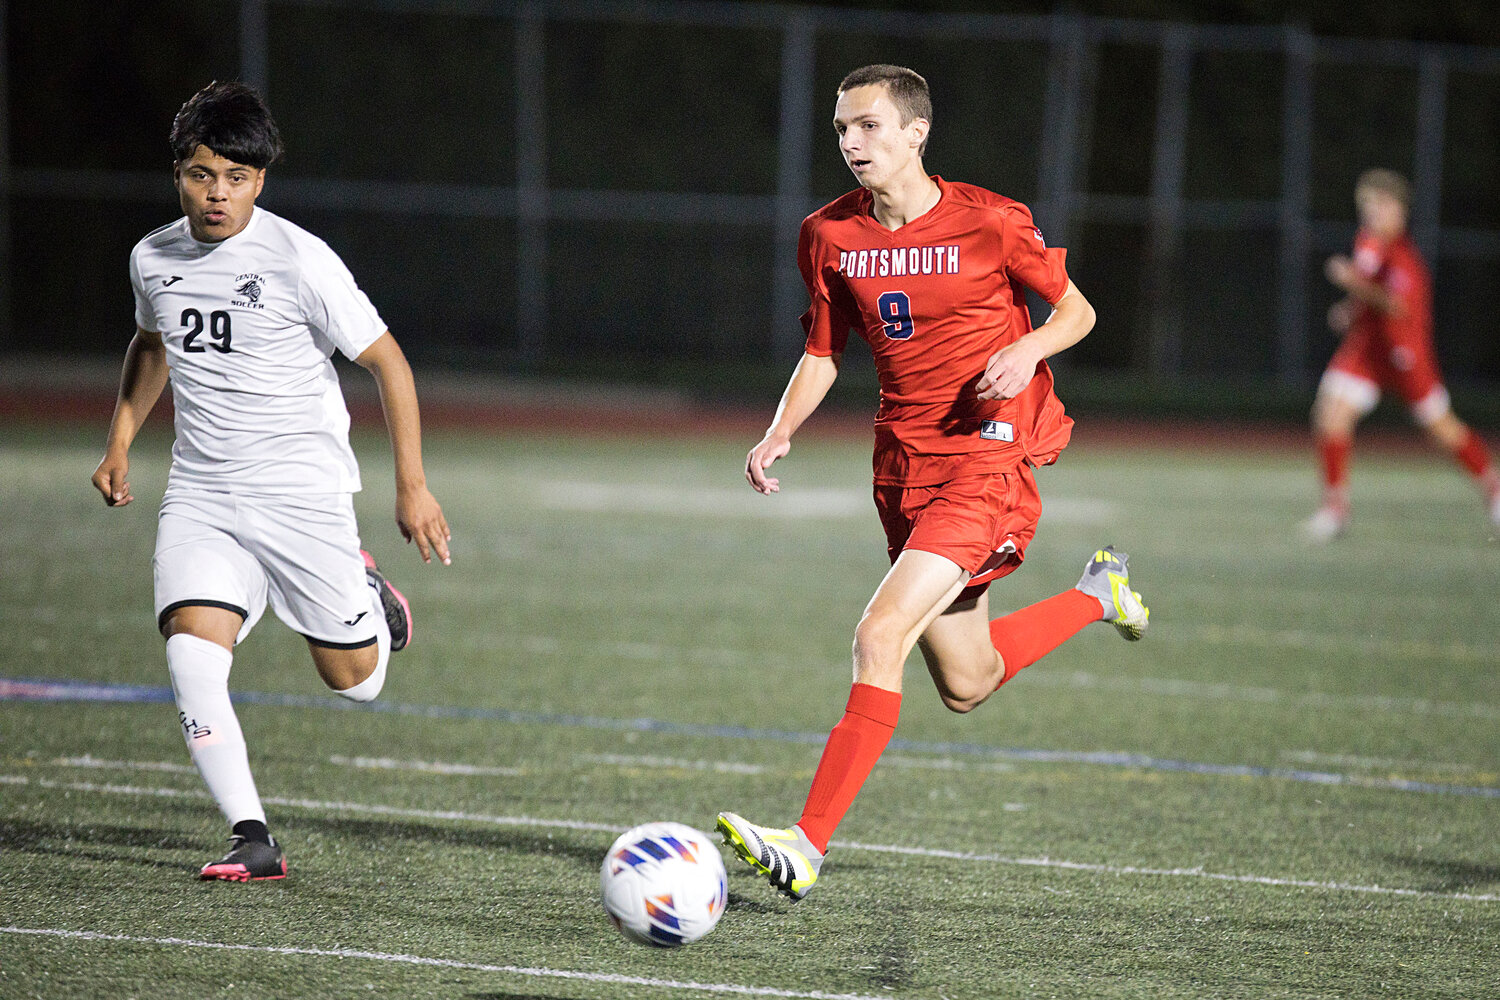 Defender Owen Gervelis carries the ball upfield during Tuesday’s match against Central.